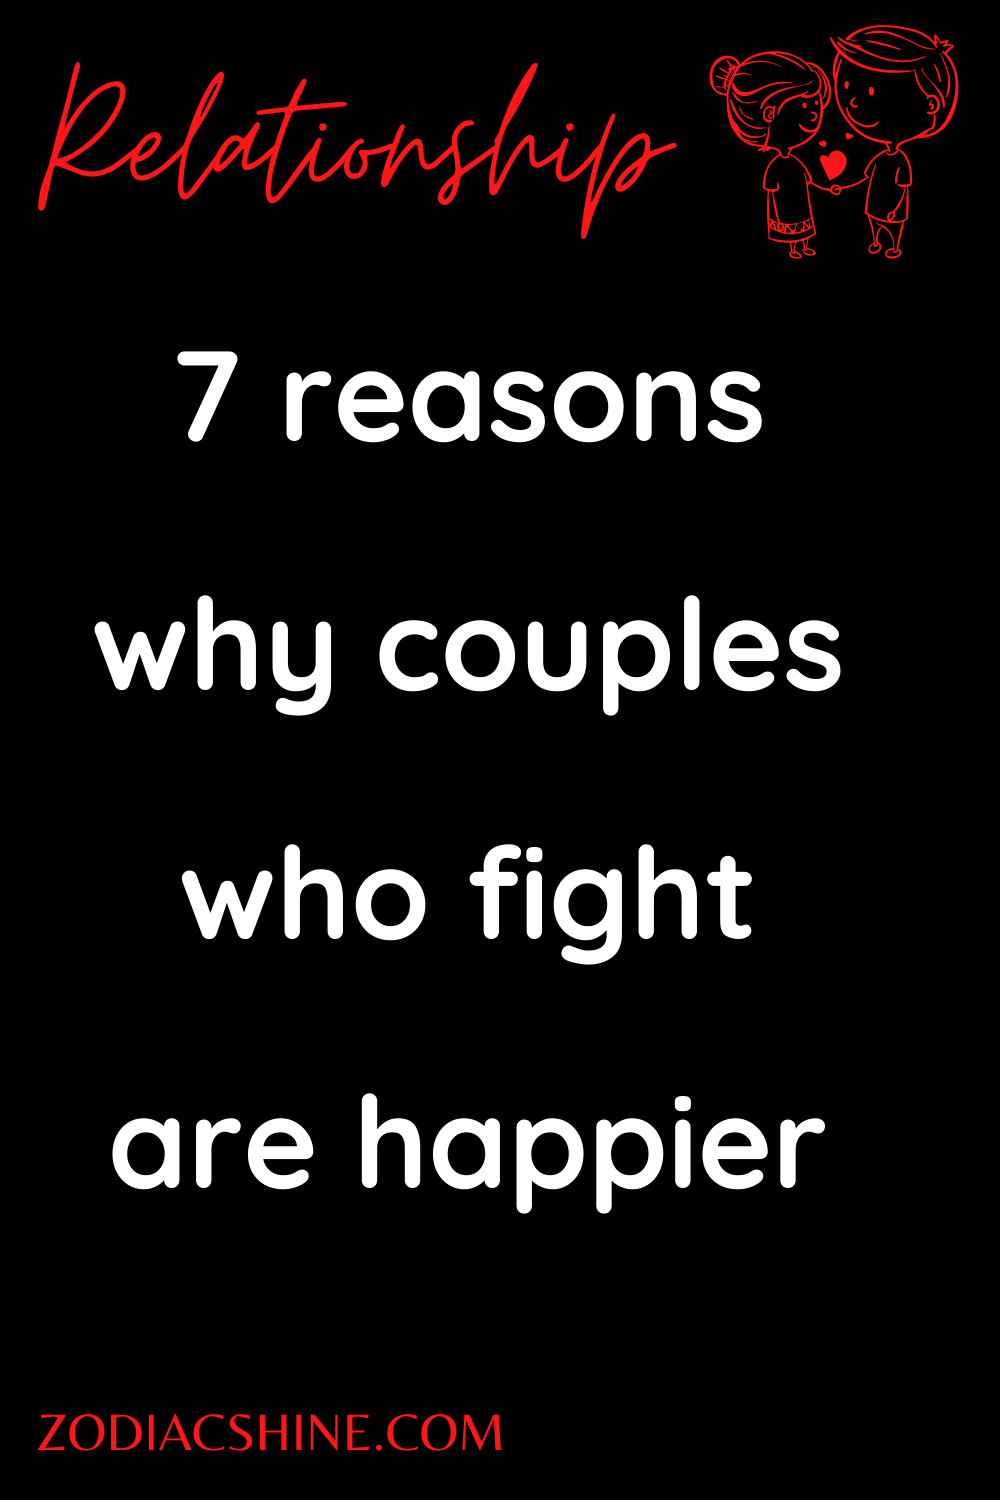 7 reasons why couples who fight are happier